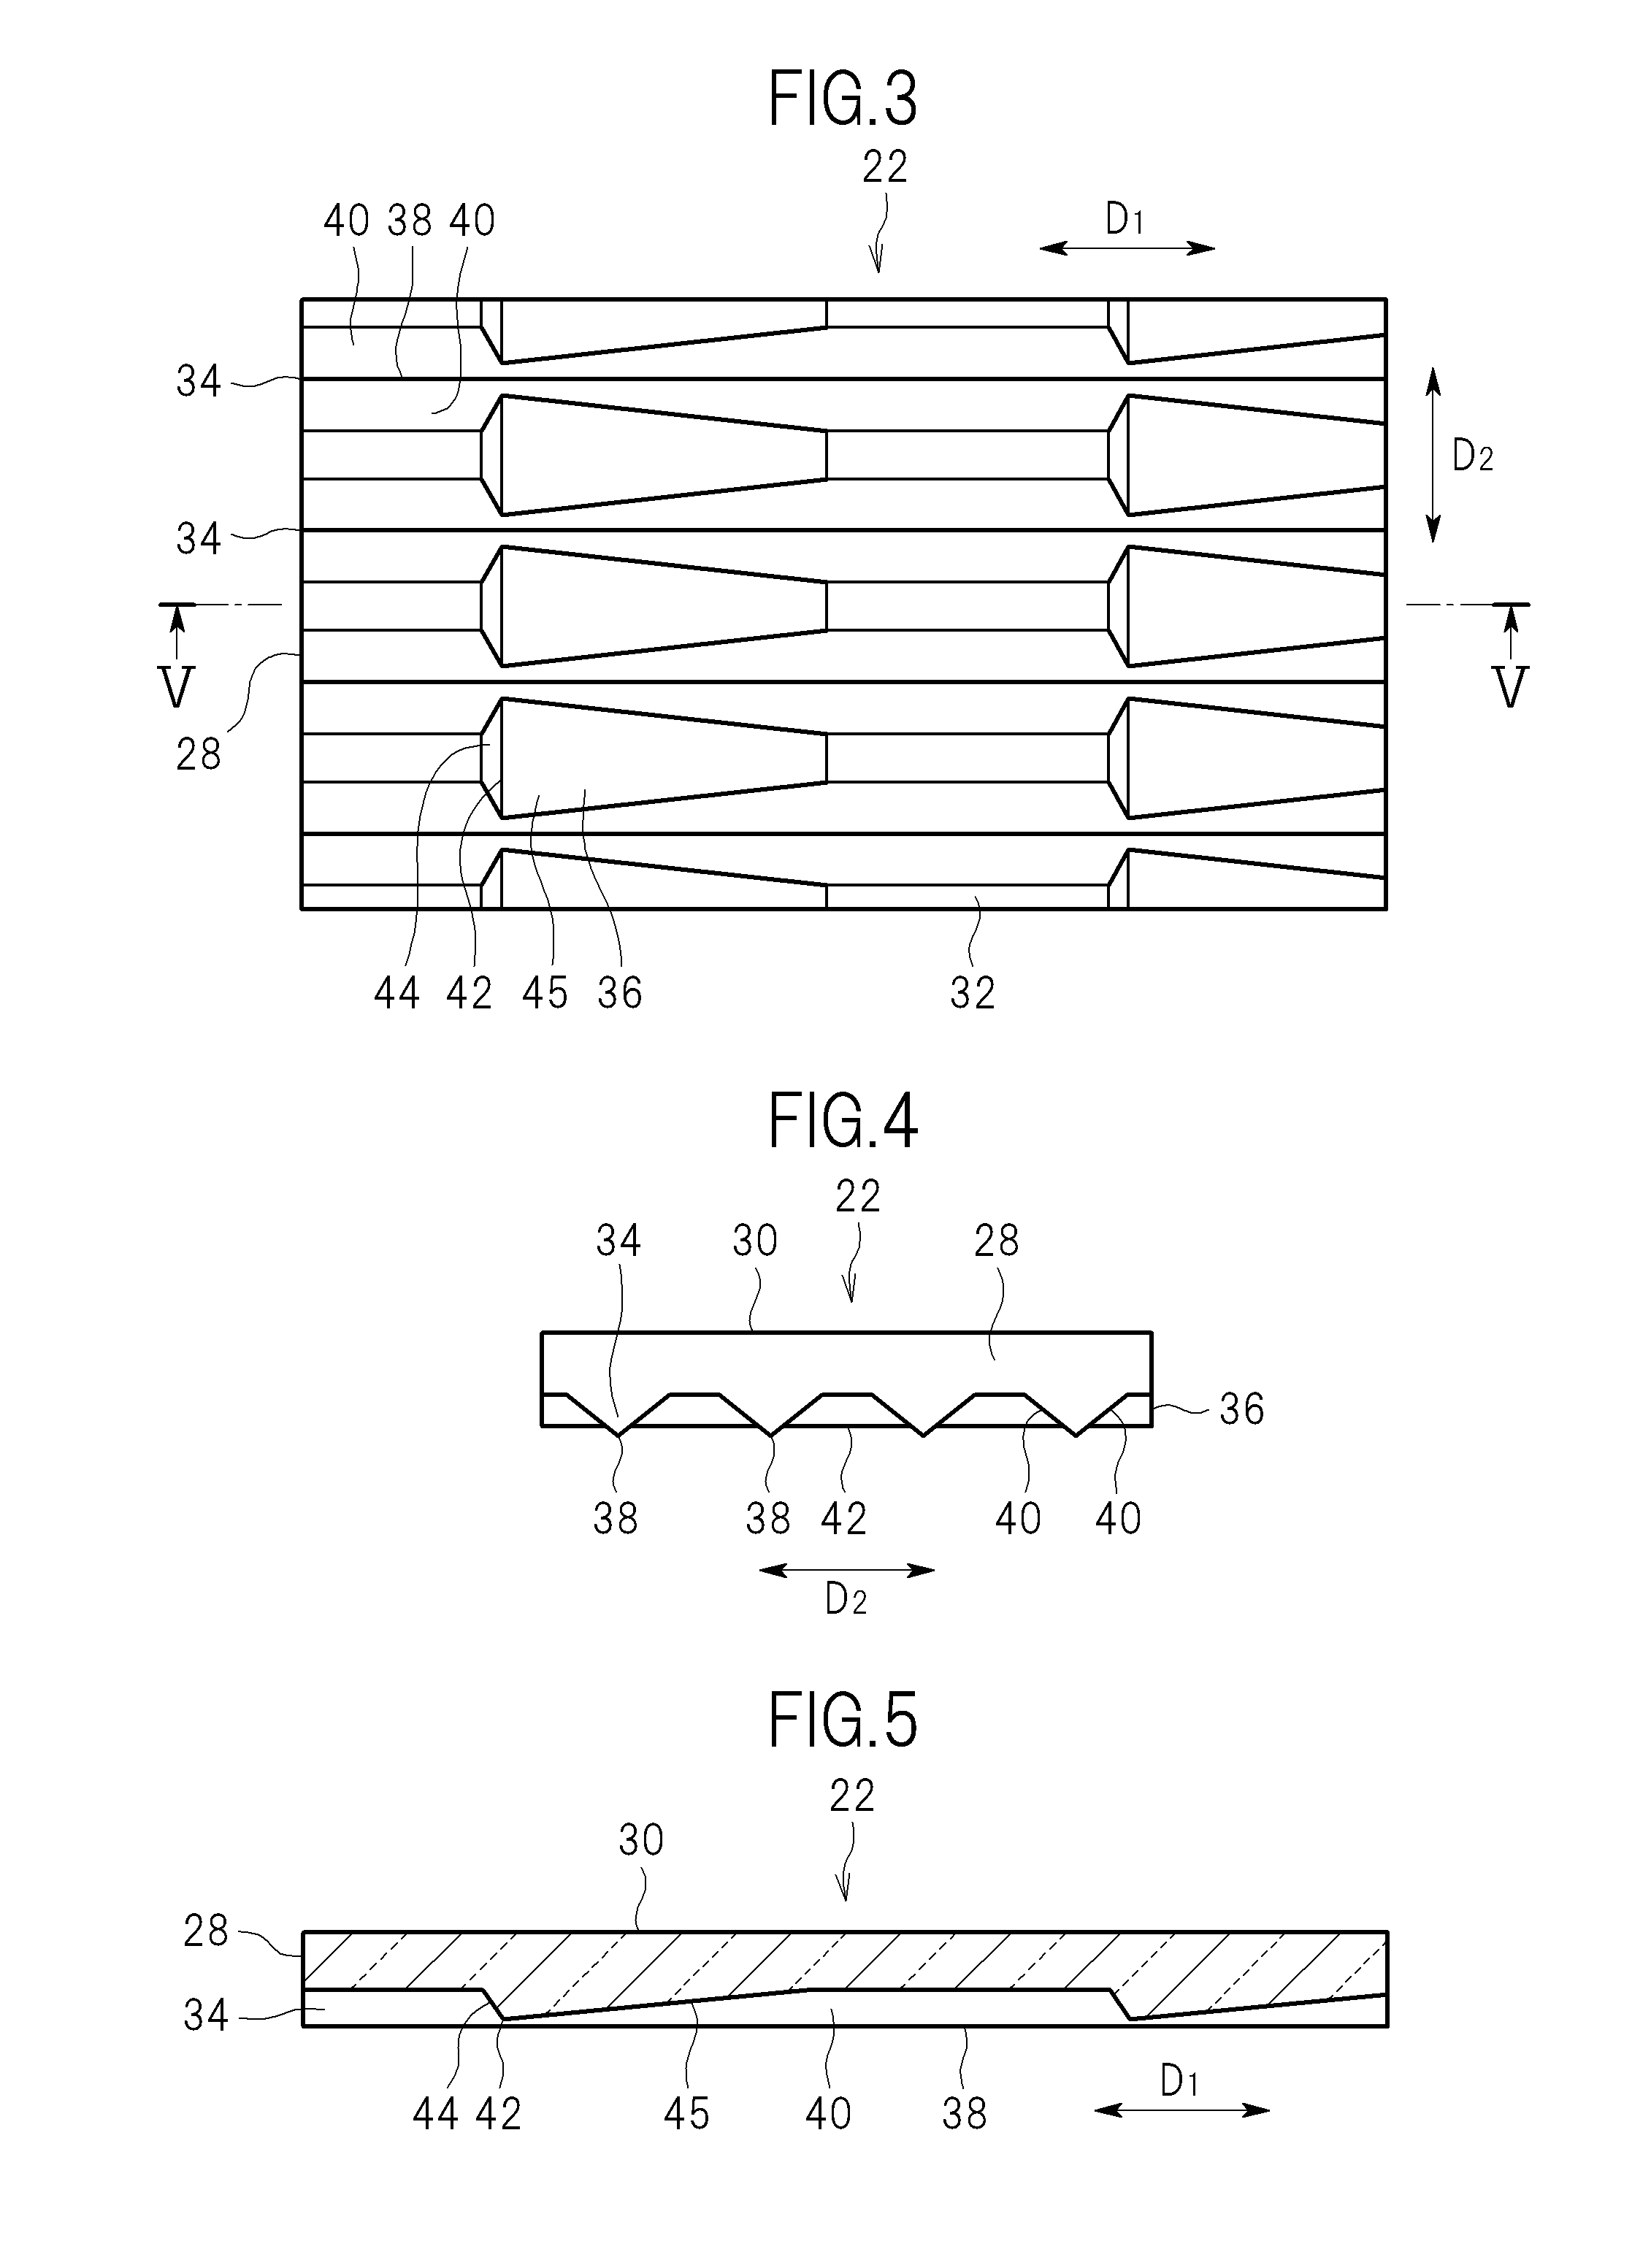 Liquid crystal display device using light guide plate